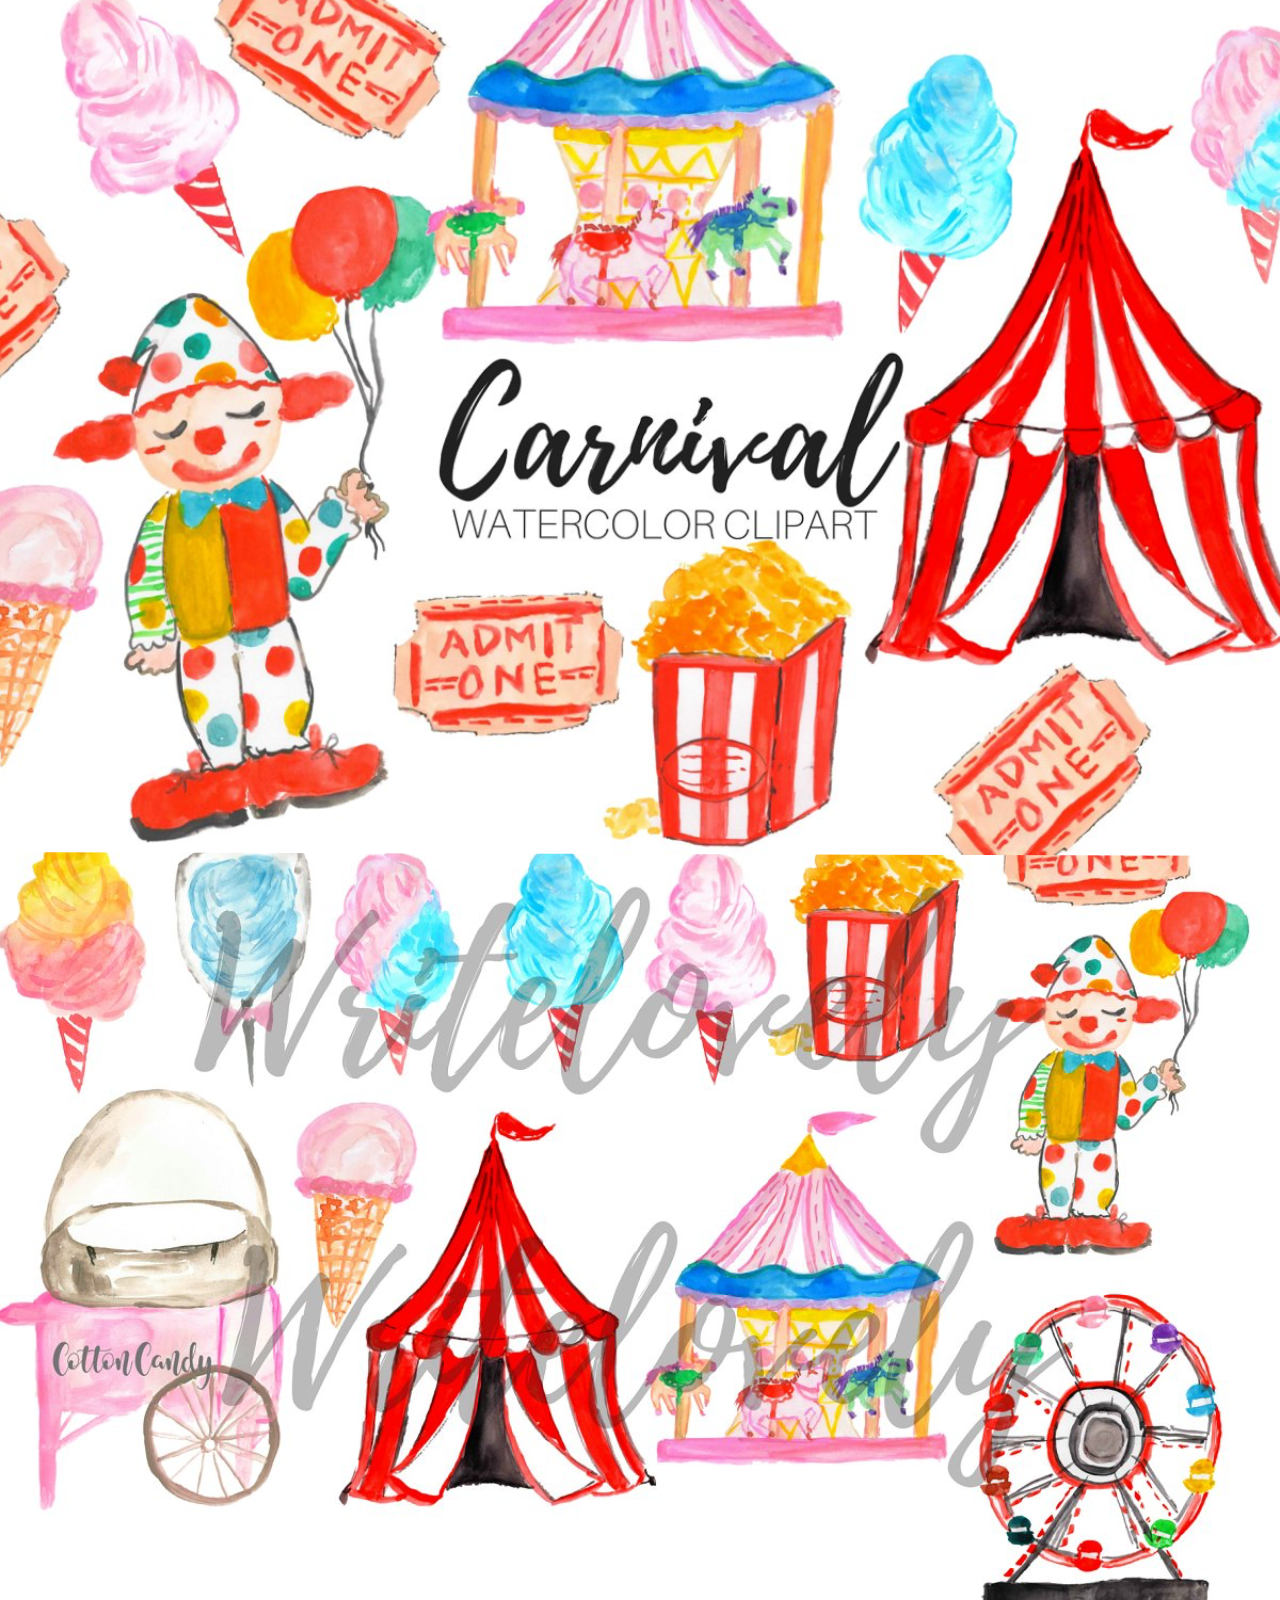 Watercolor carnival clipart pinterest image preview.